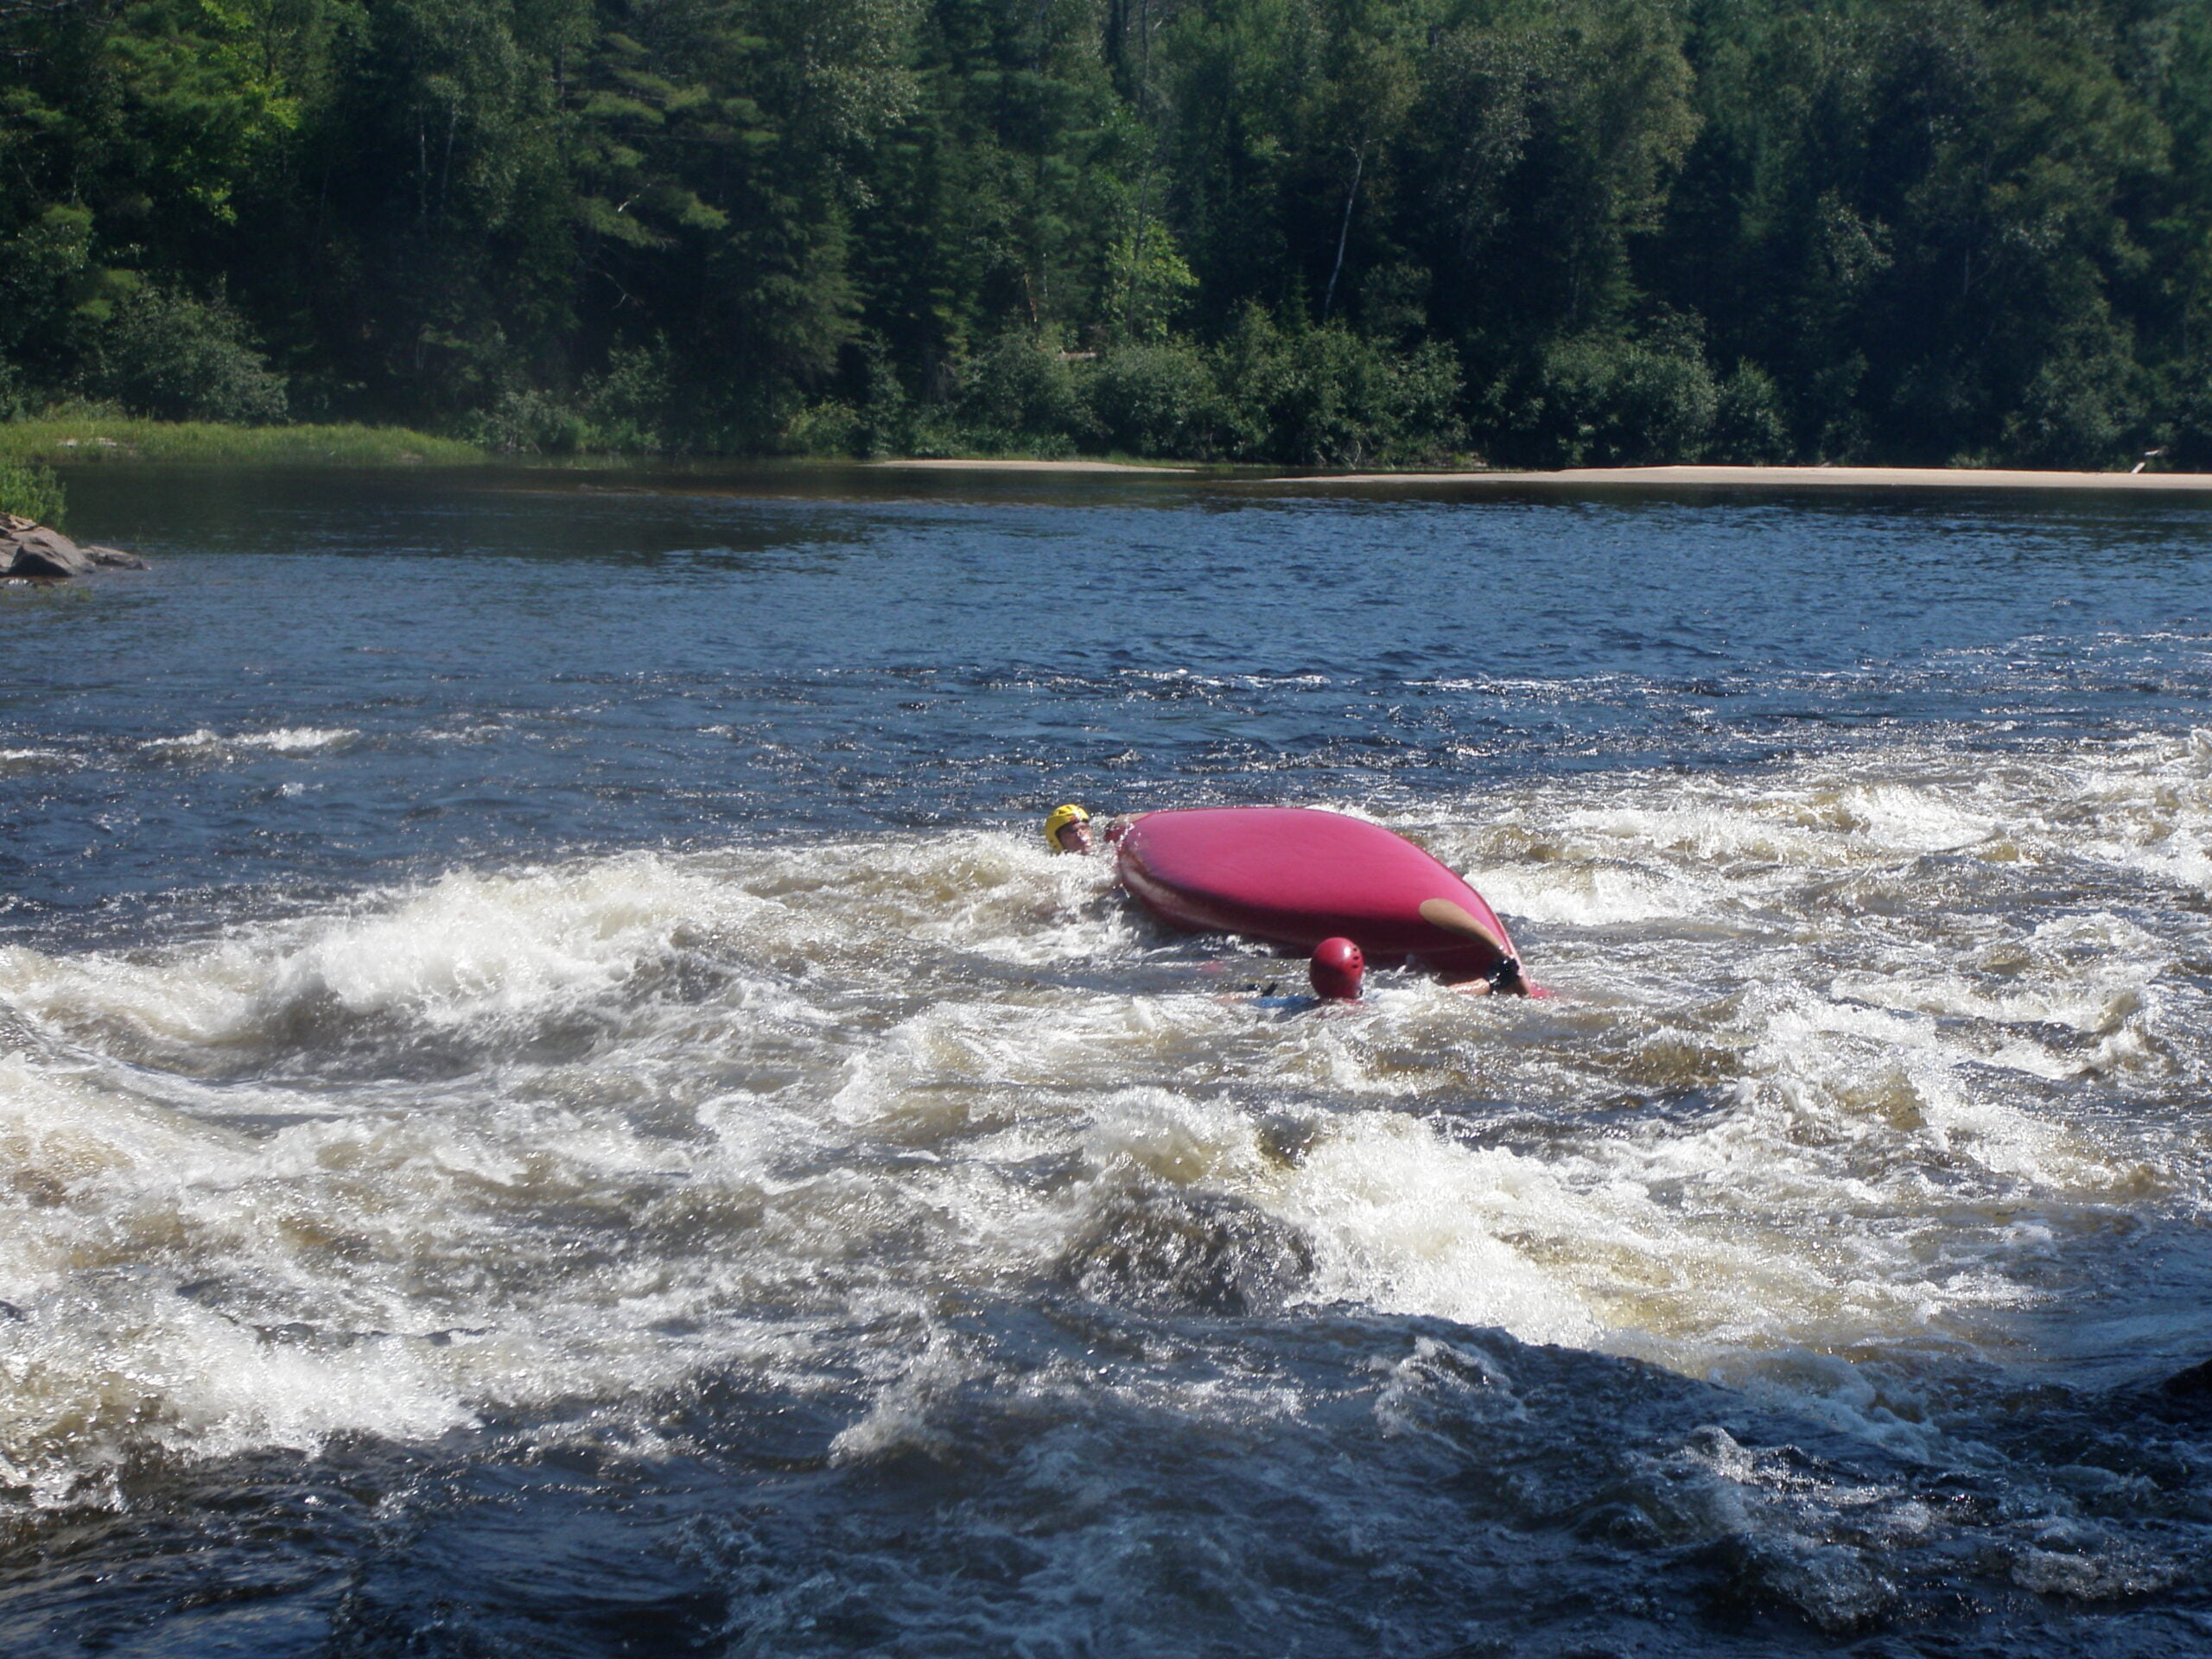 Canoe capsized with 2 occupants after 50-50 rapid on Noire river